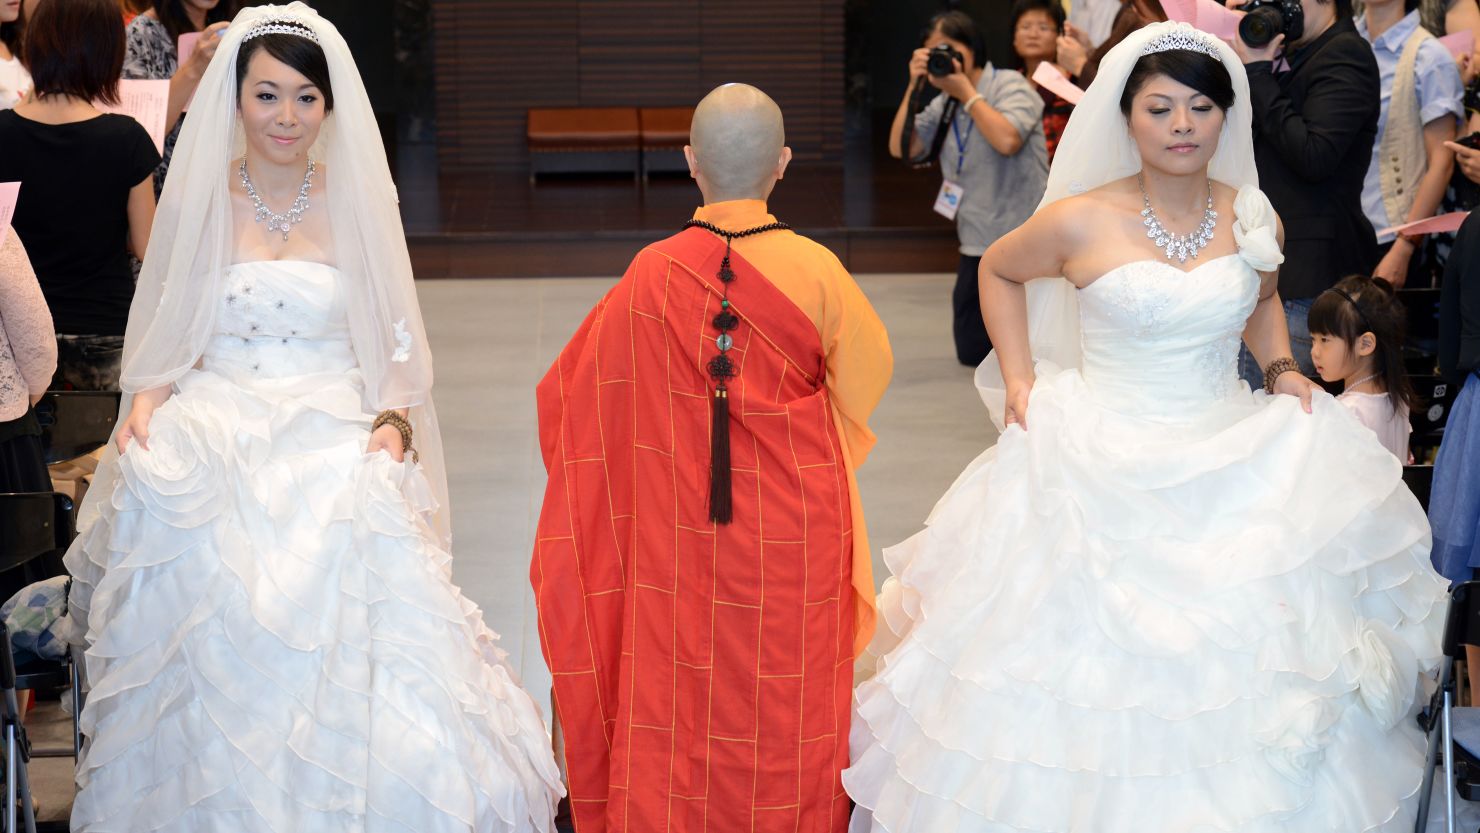 Huang Mei-yu (R) and her partner You Ya-ting attend their Buddhist wedding ceremony in Taoyuan, Taiwan, on Saturday.